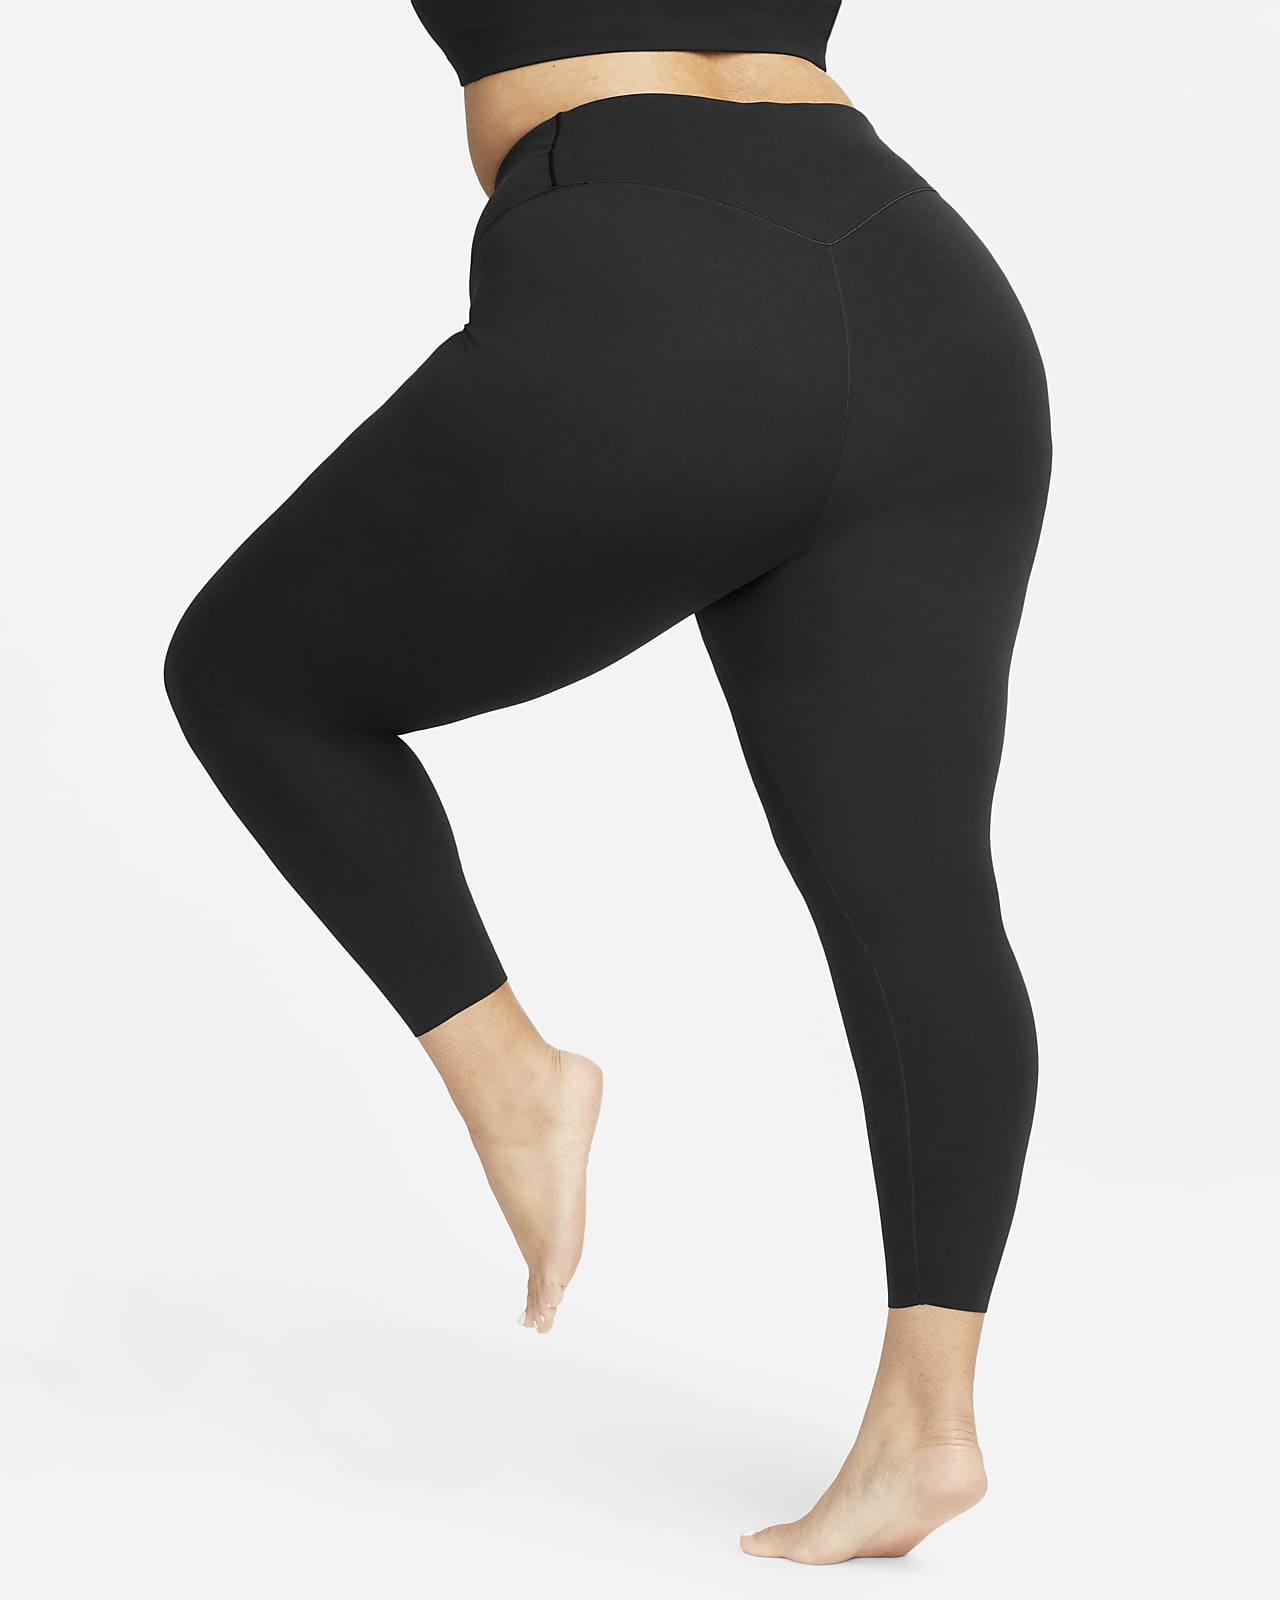 Women's Plus Size High Waist 7/8 Compression Workout Leggings with